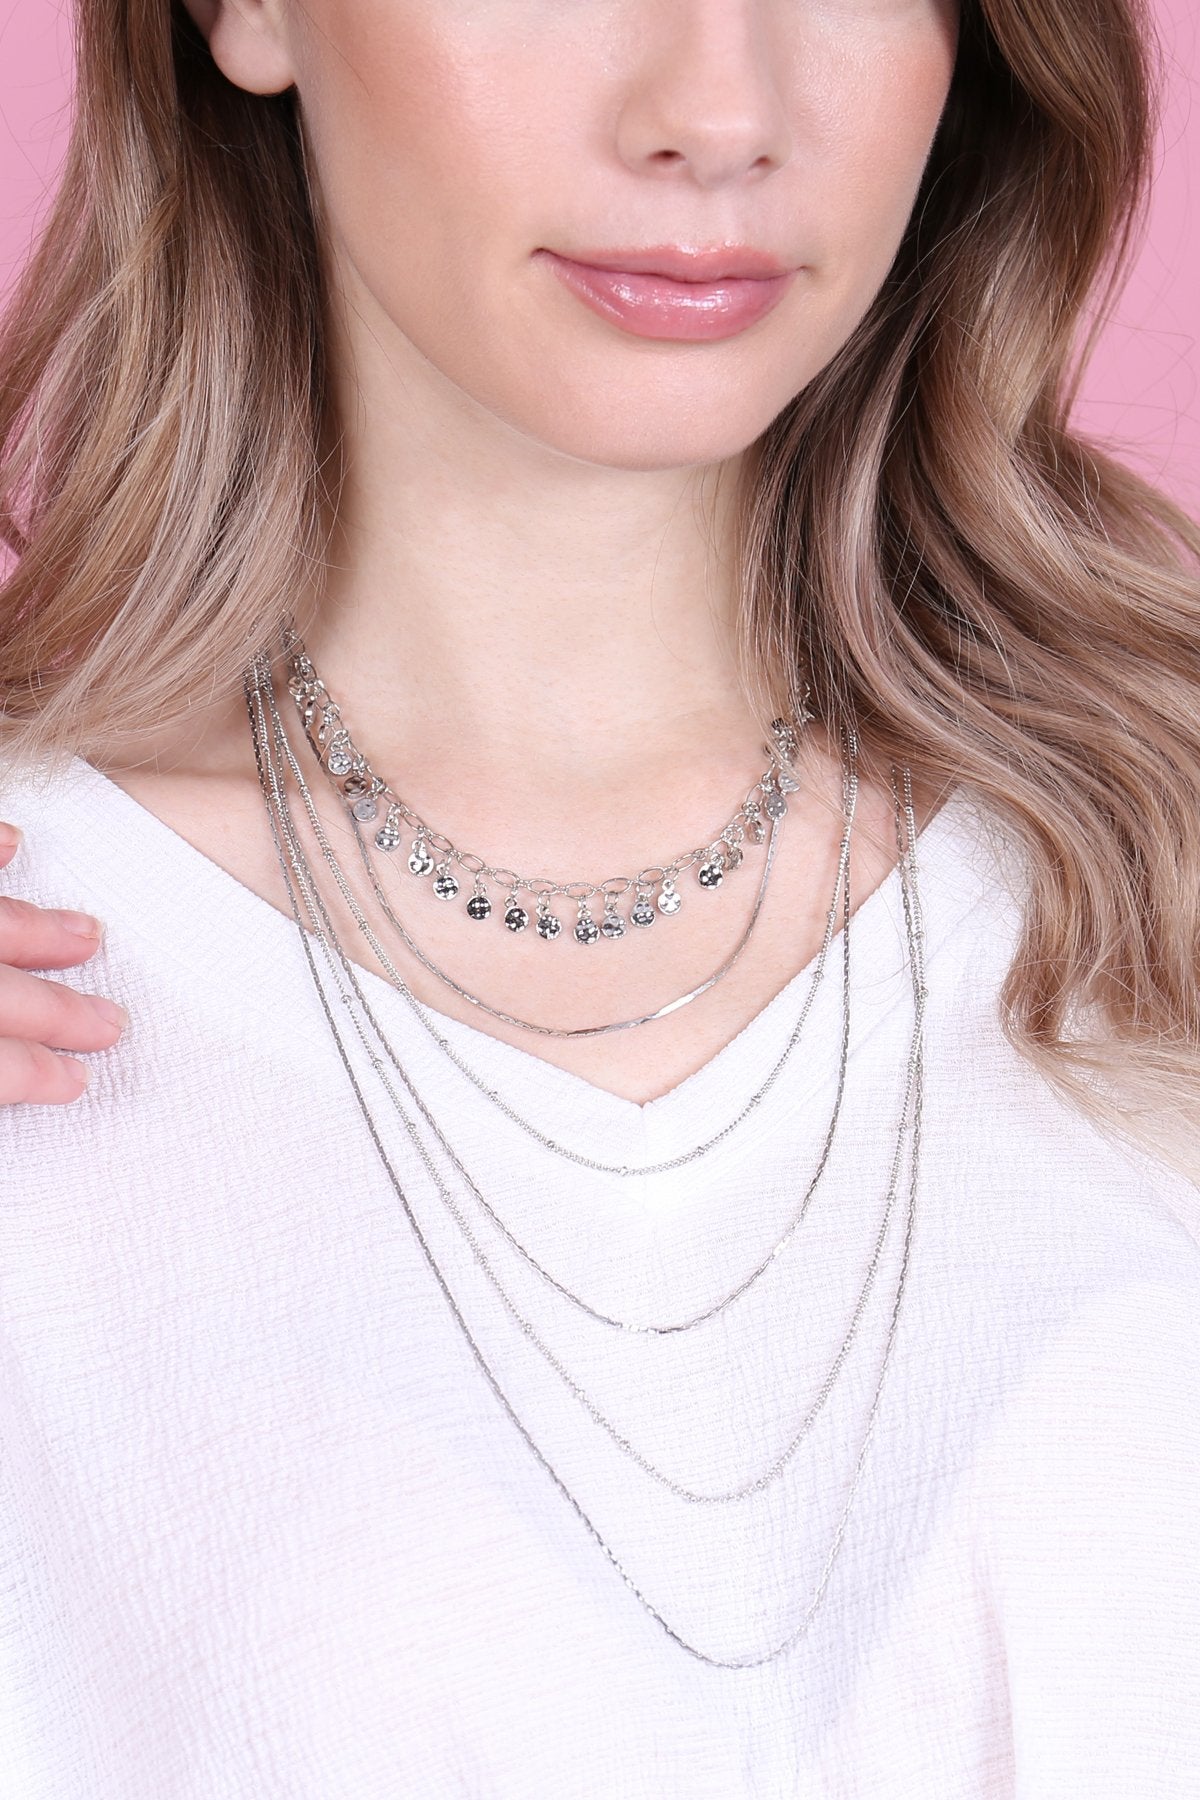 Hdn2640 - Delicate Layer Necklaces